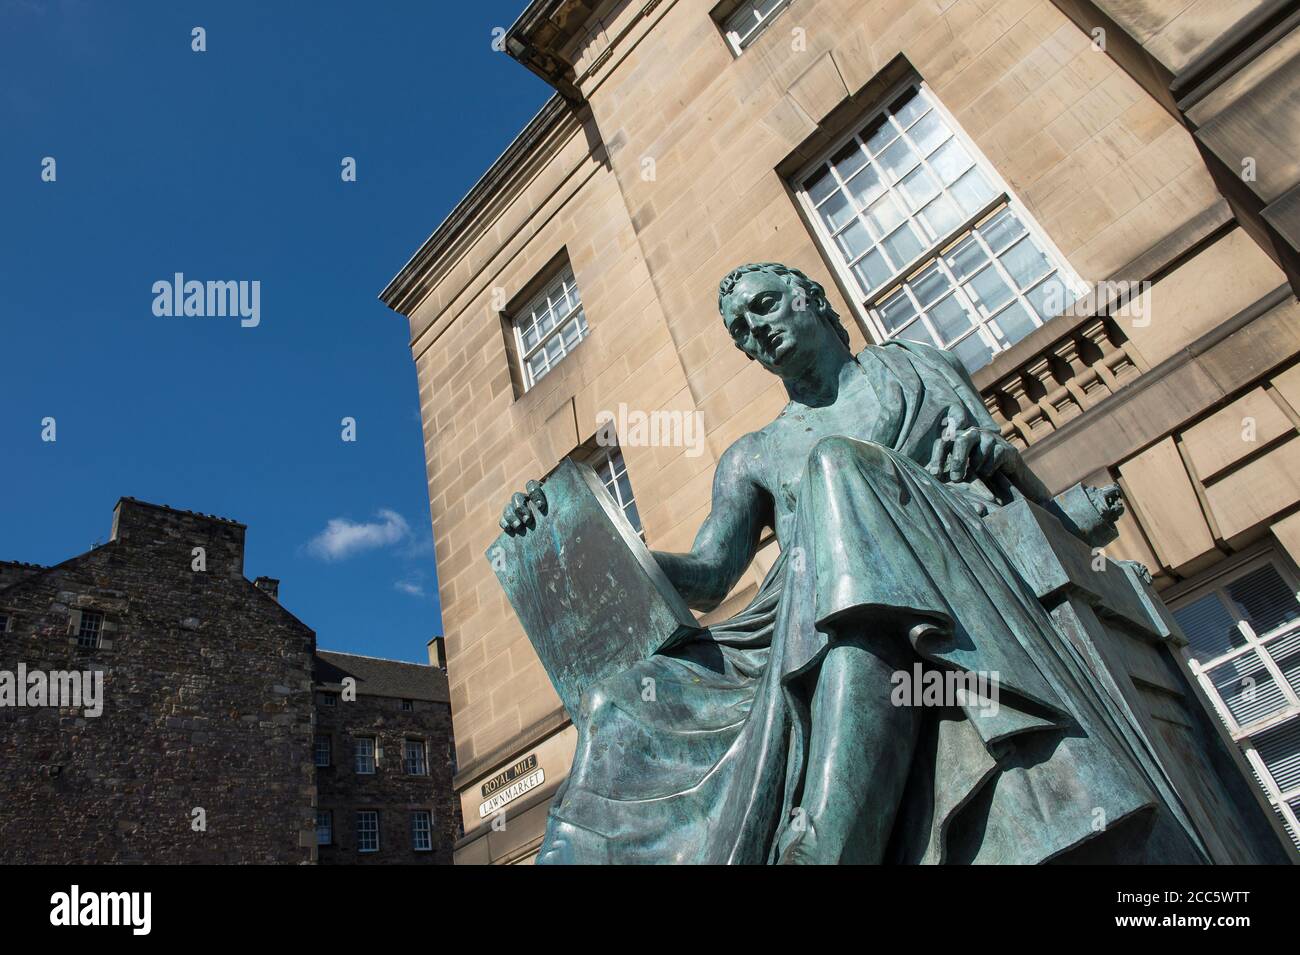 Statue of David Hume on the Royal Mile in the city of Edinburgh, Scotland. Stock Photo